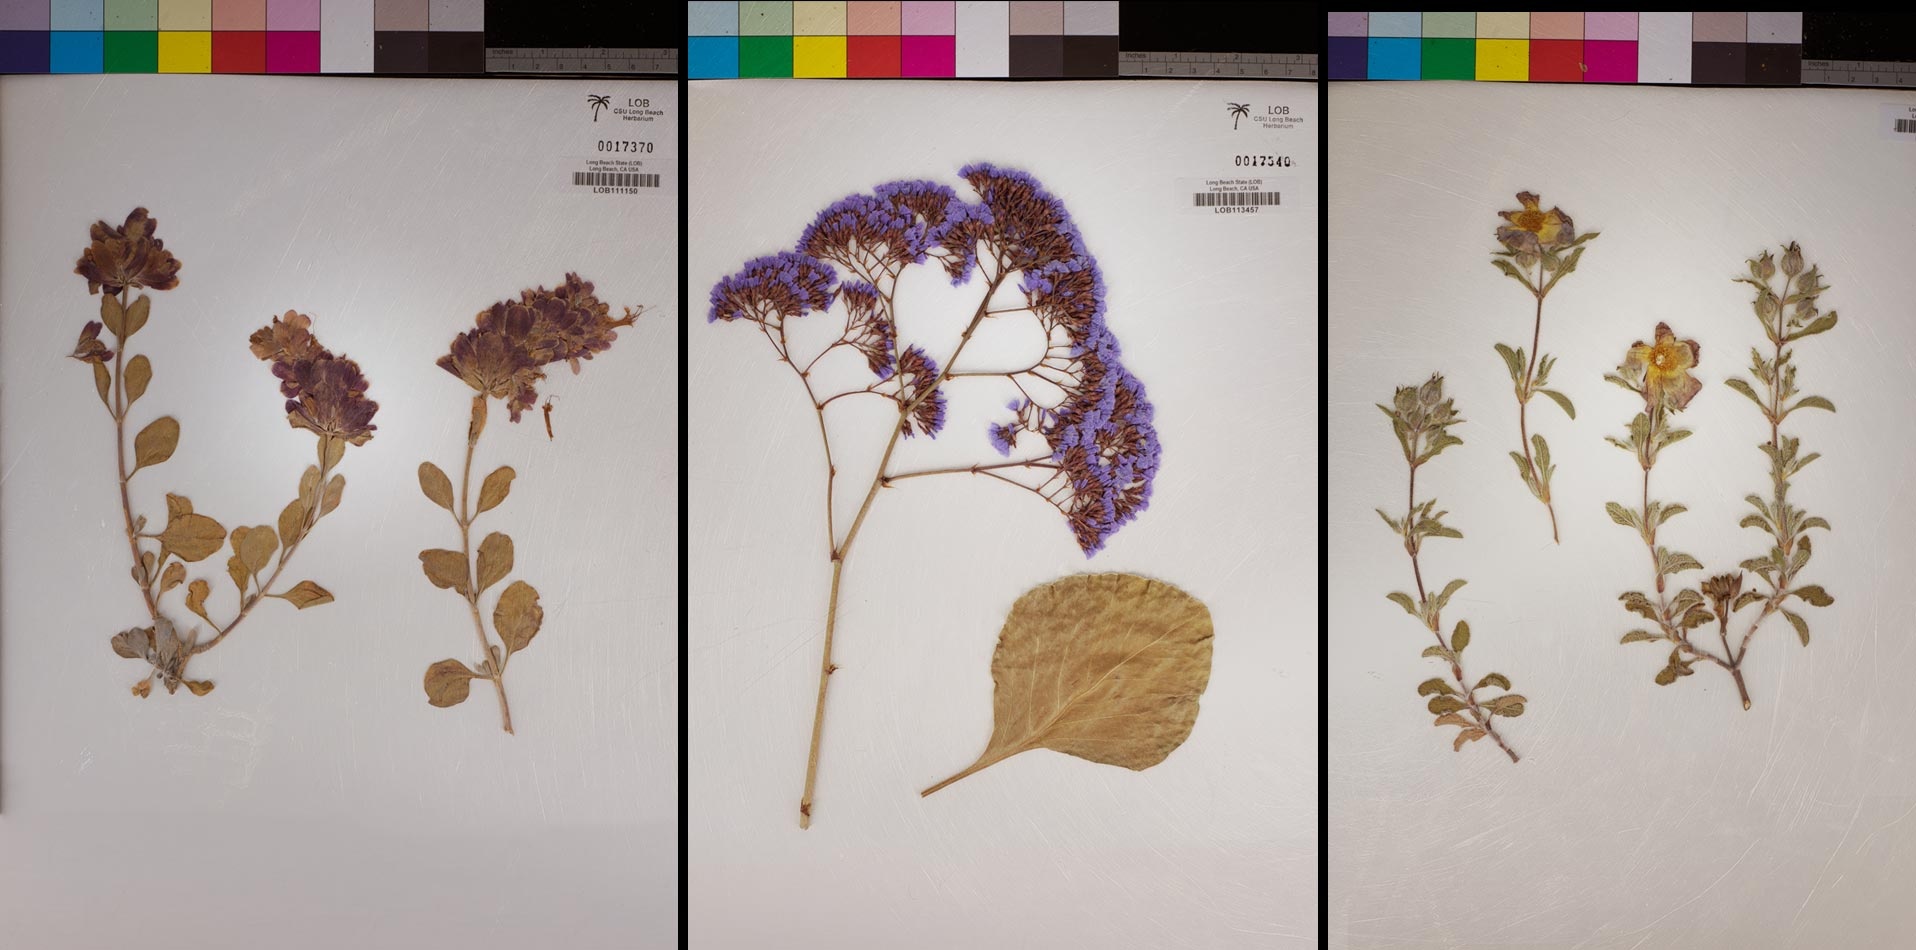 digitized plant collection